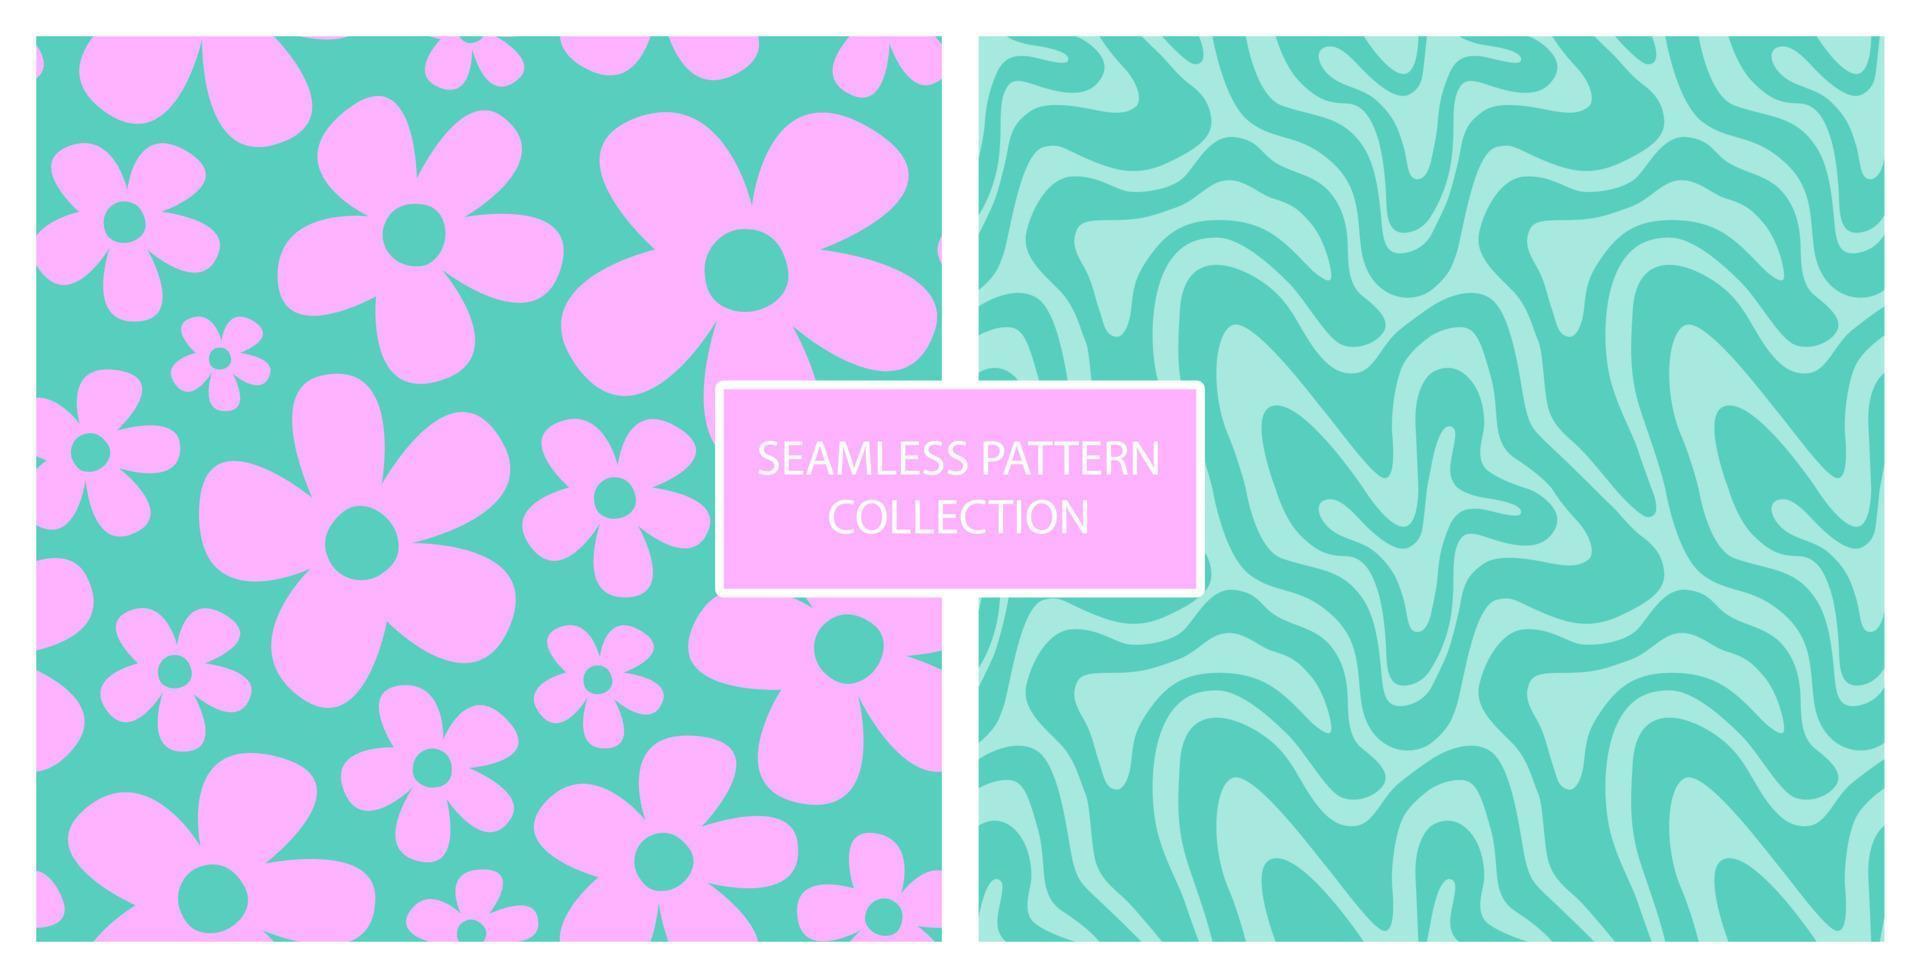 1970 seamless retro pattern with trippy wave and daisy flowers. Groovy vintage hand-drawn vector background. Hippie aesthetic wallpaper.